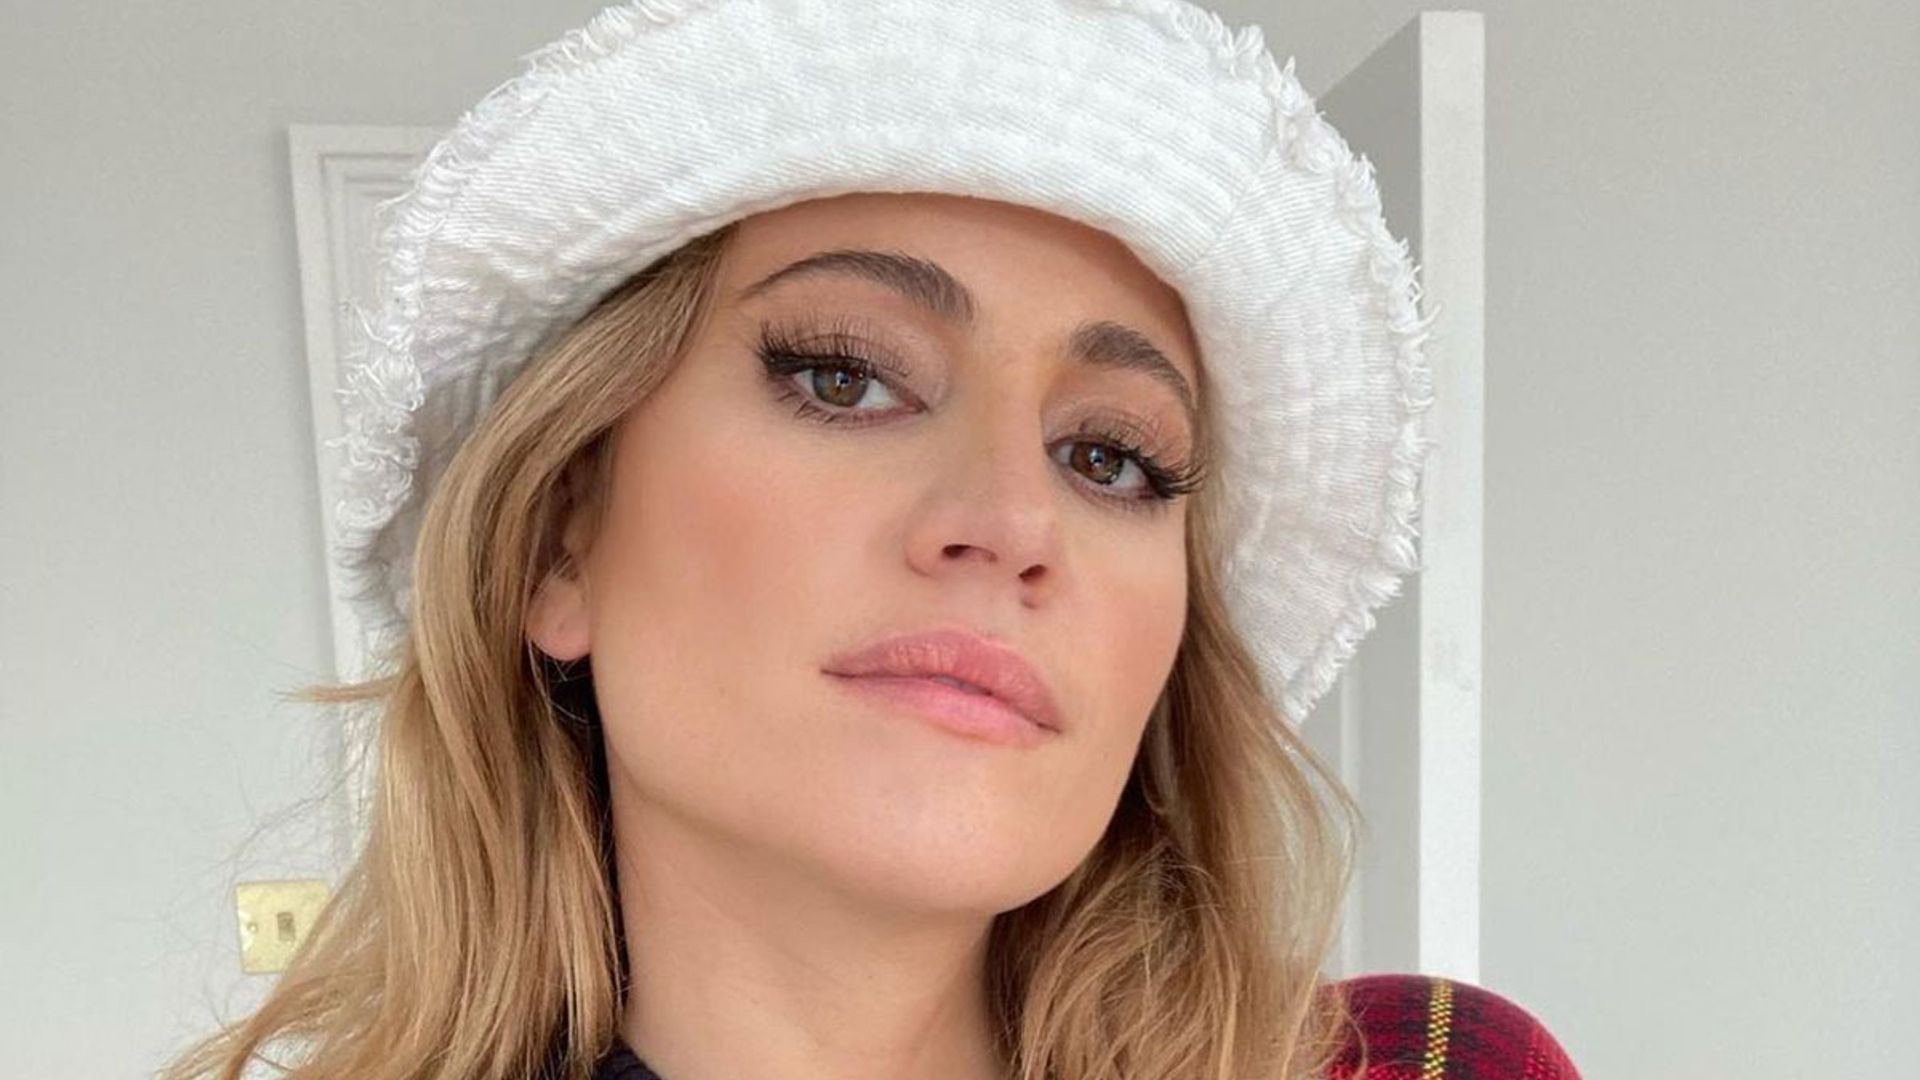 Pixie Lott is unrecognisable with new look - fans react